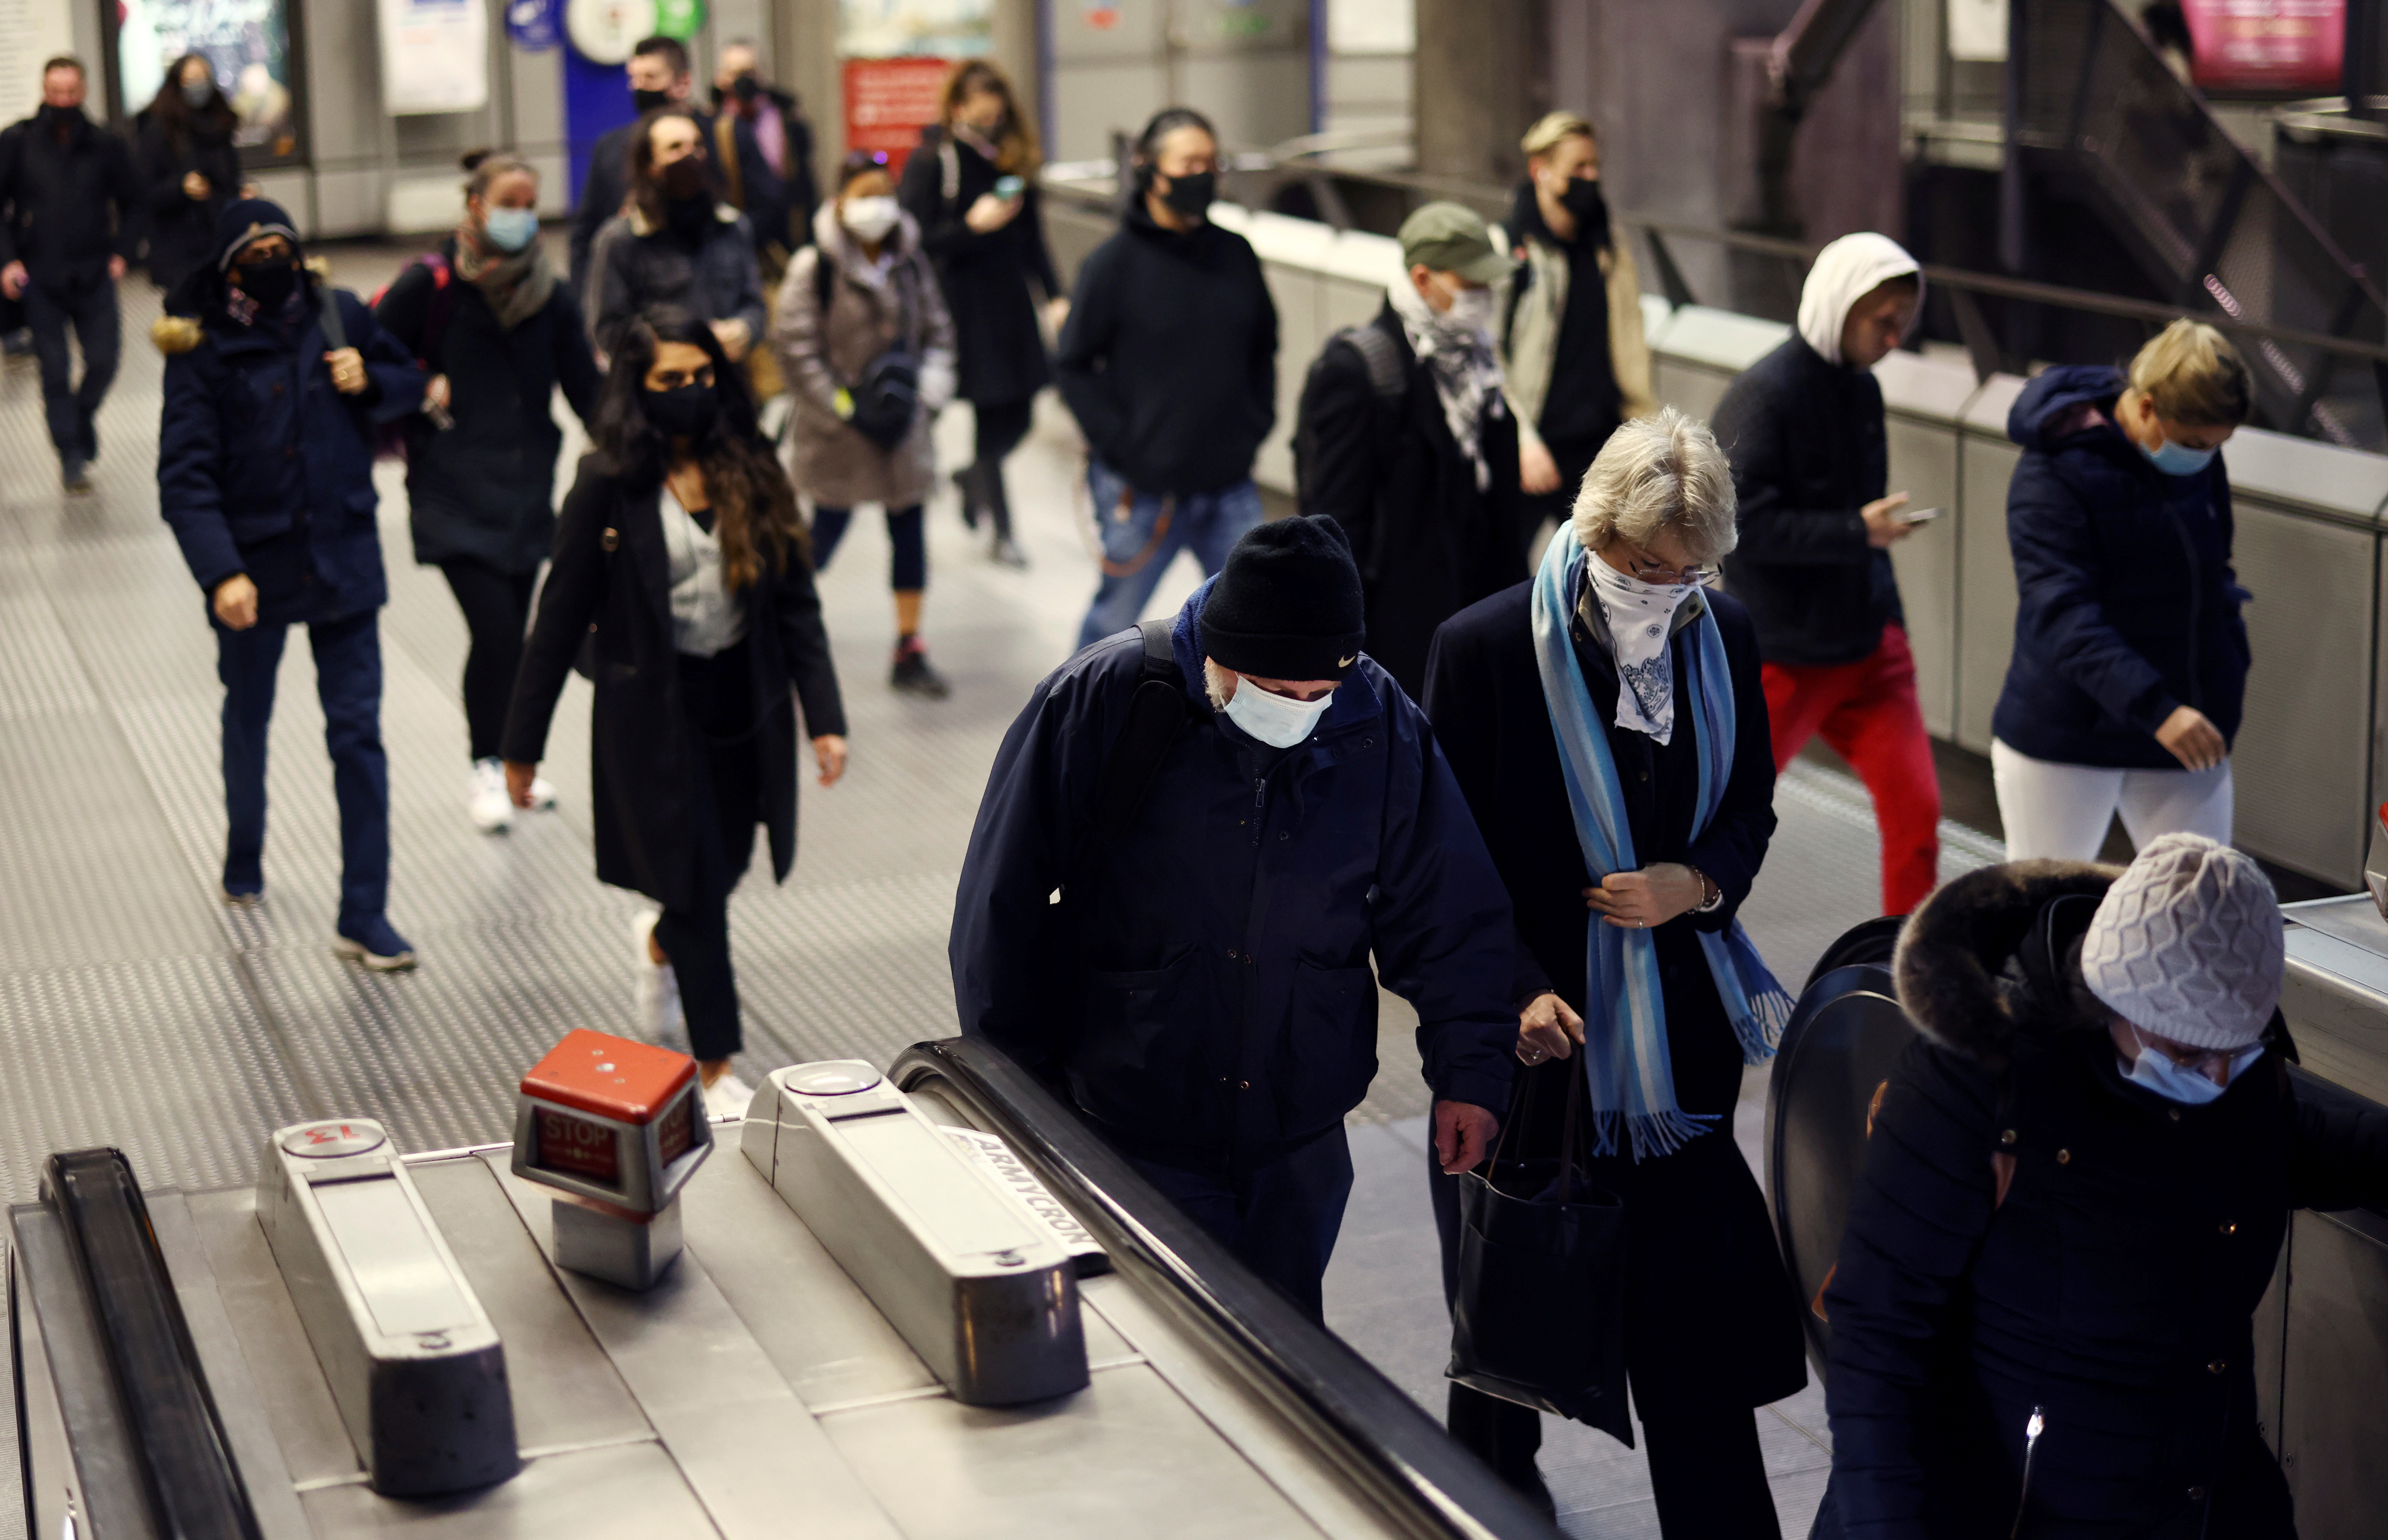 People walk through Westminster Underground station during morning rush hour, amid the coronavirus disease (COVID-19) outbreak in London, Britain, December 1, 2021. REUTERS/Henry Nicholls